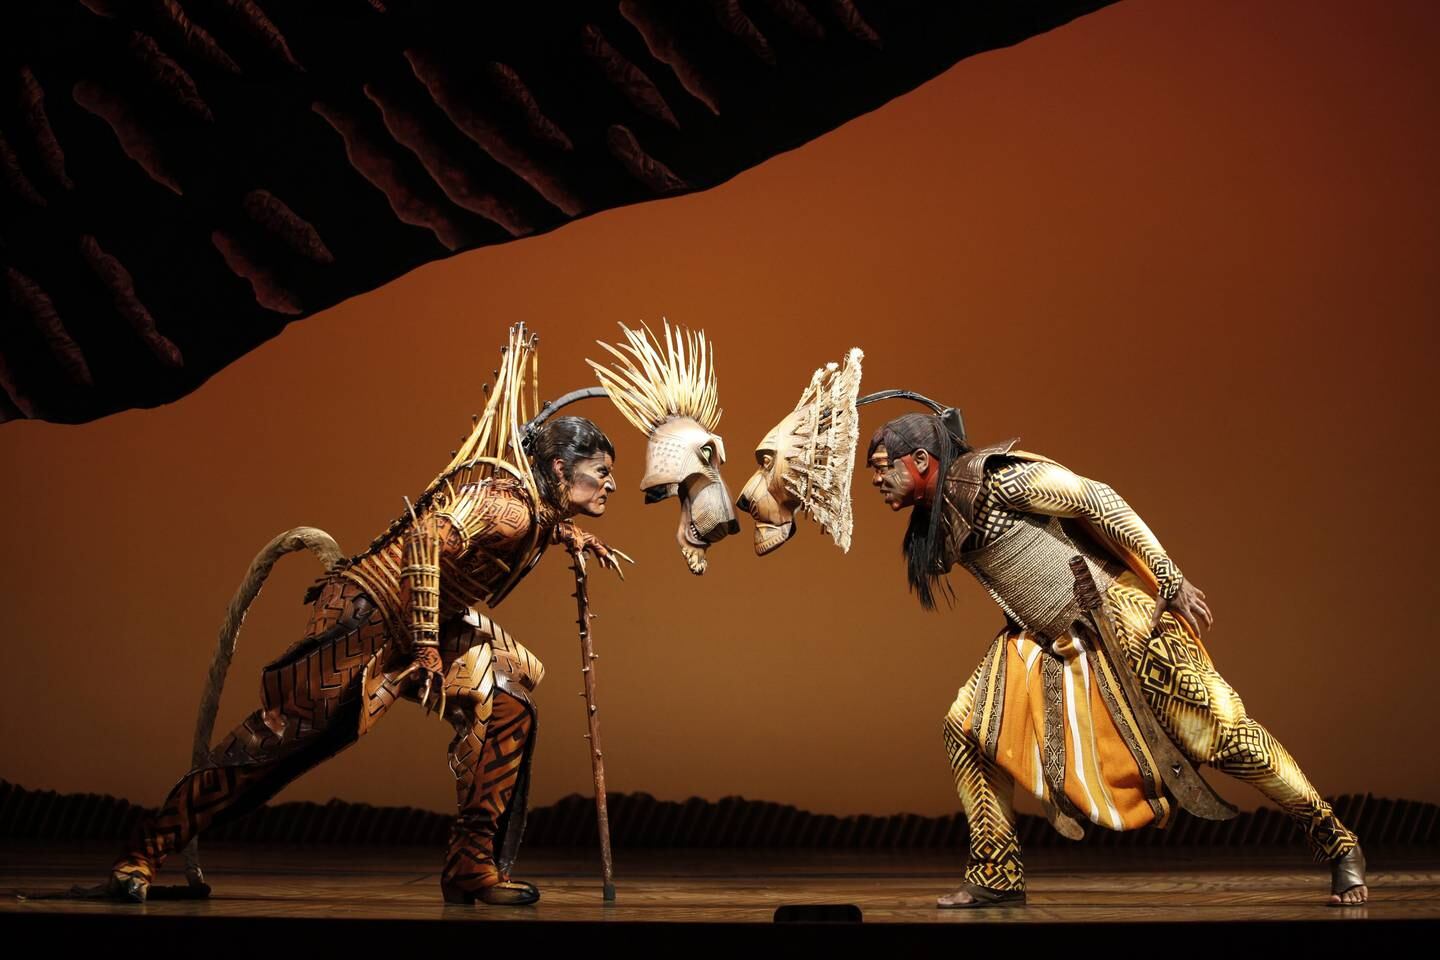 'The Lion King' musical brings its own creative and technical wizardry to the table with epic stage backdrops and colourful costumes. Photo: Disney